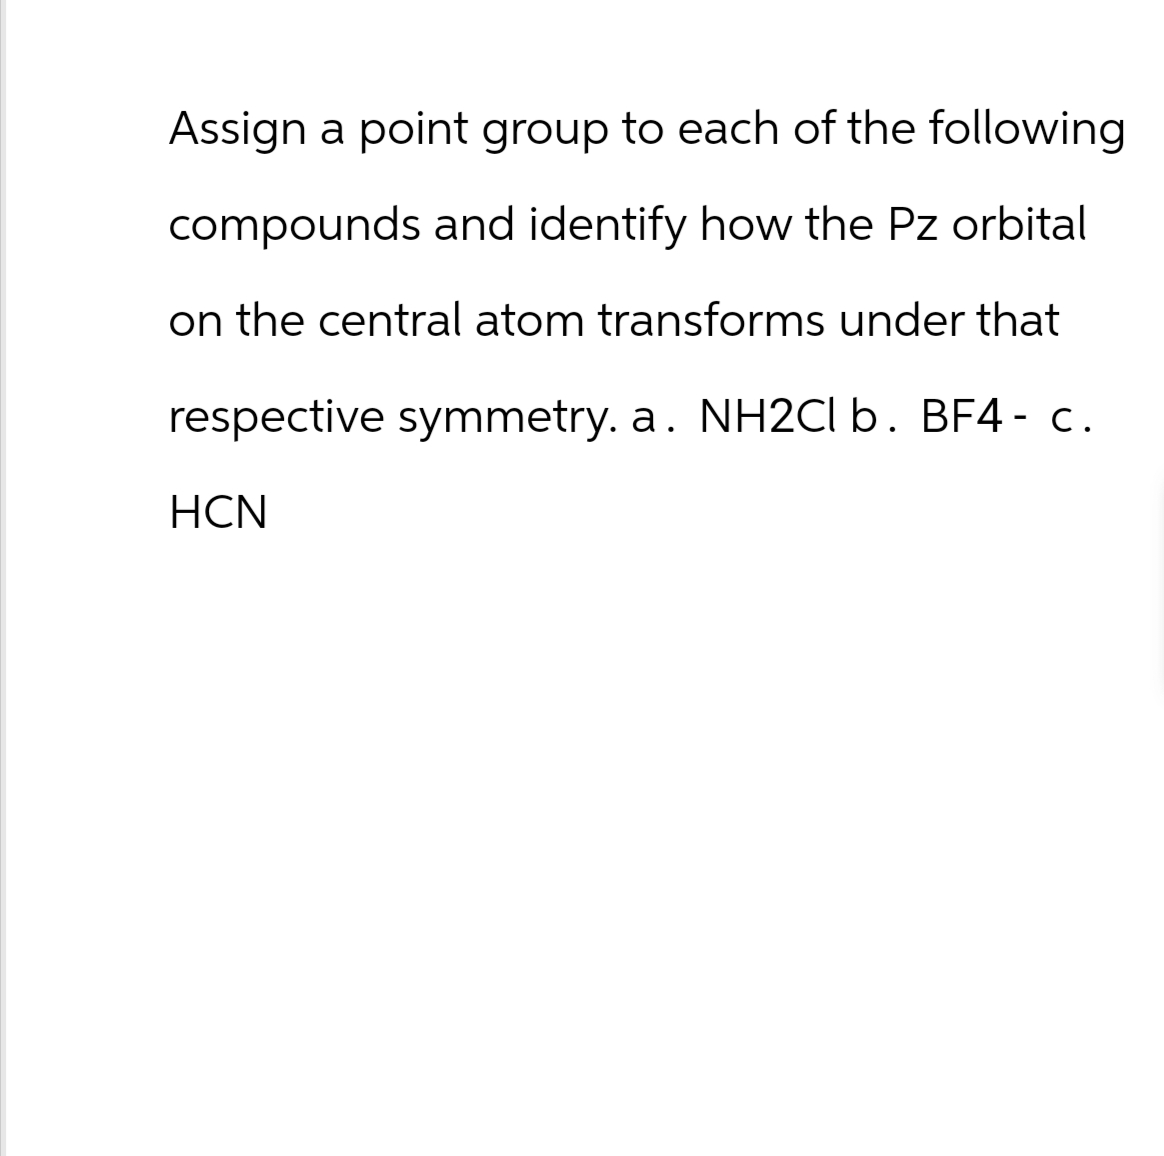 Assign a point group to each of the following
compounds and identify how the Pz orbital
on the central atom transforms under that
respective symmetry. a. NH2Cl b. BF4 - c.
HCN